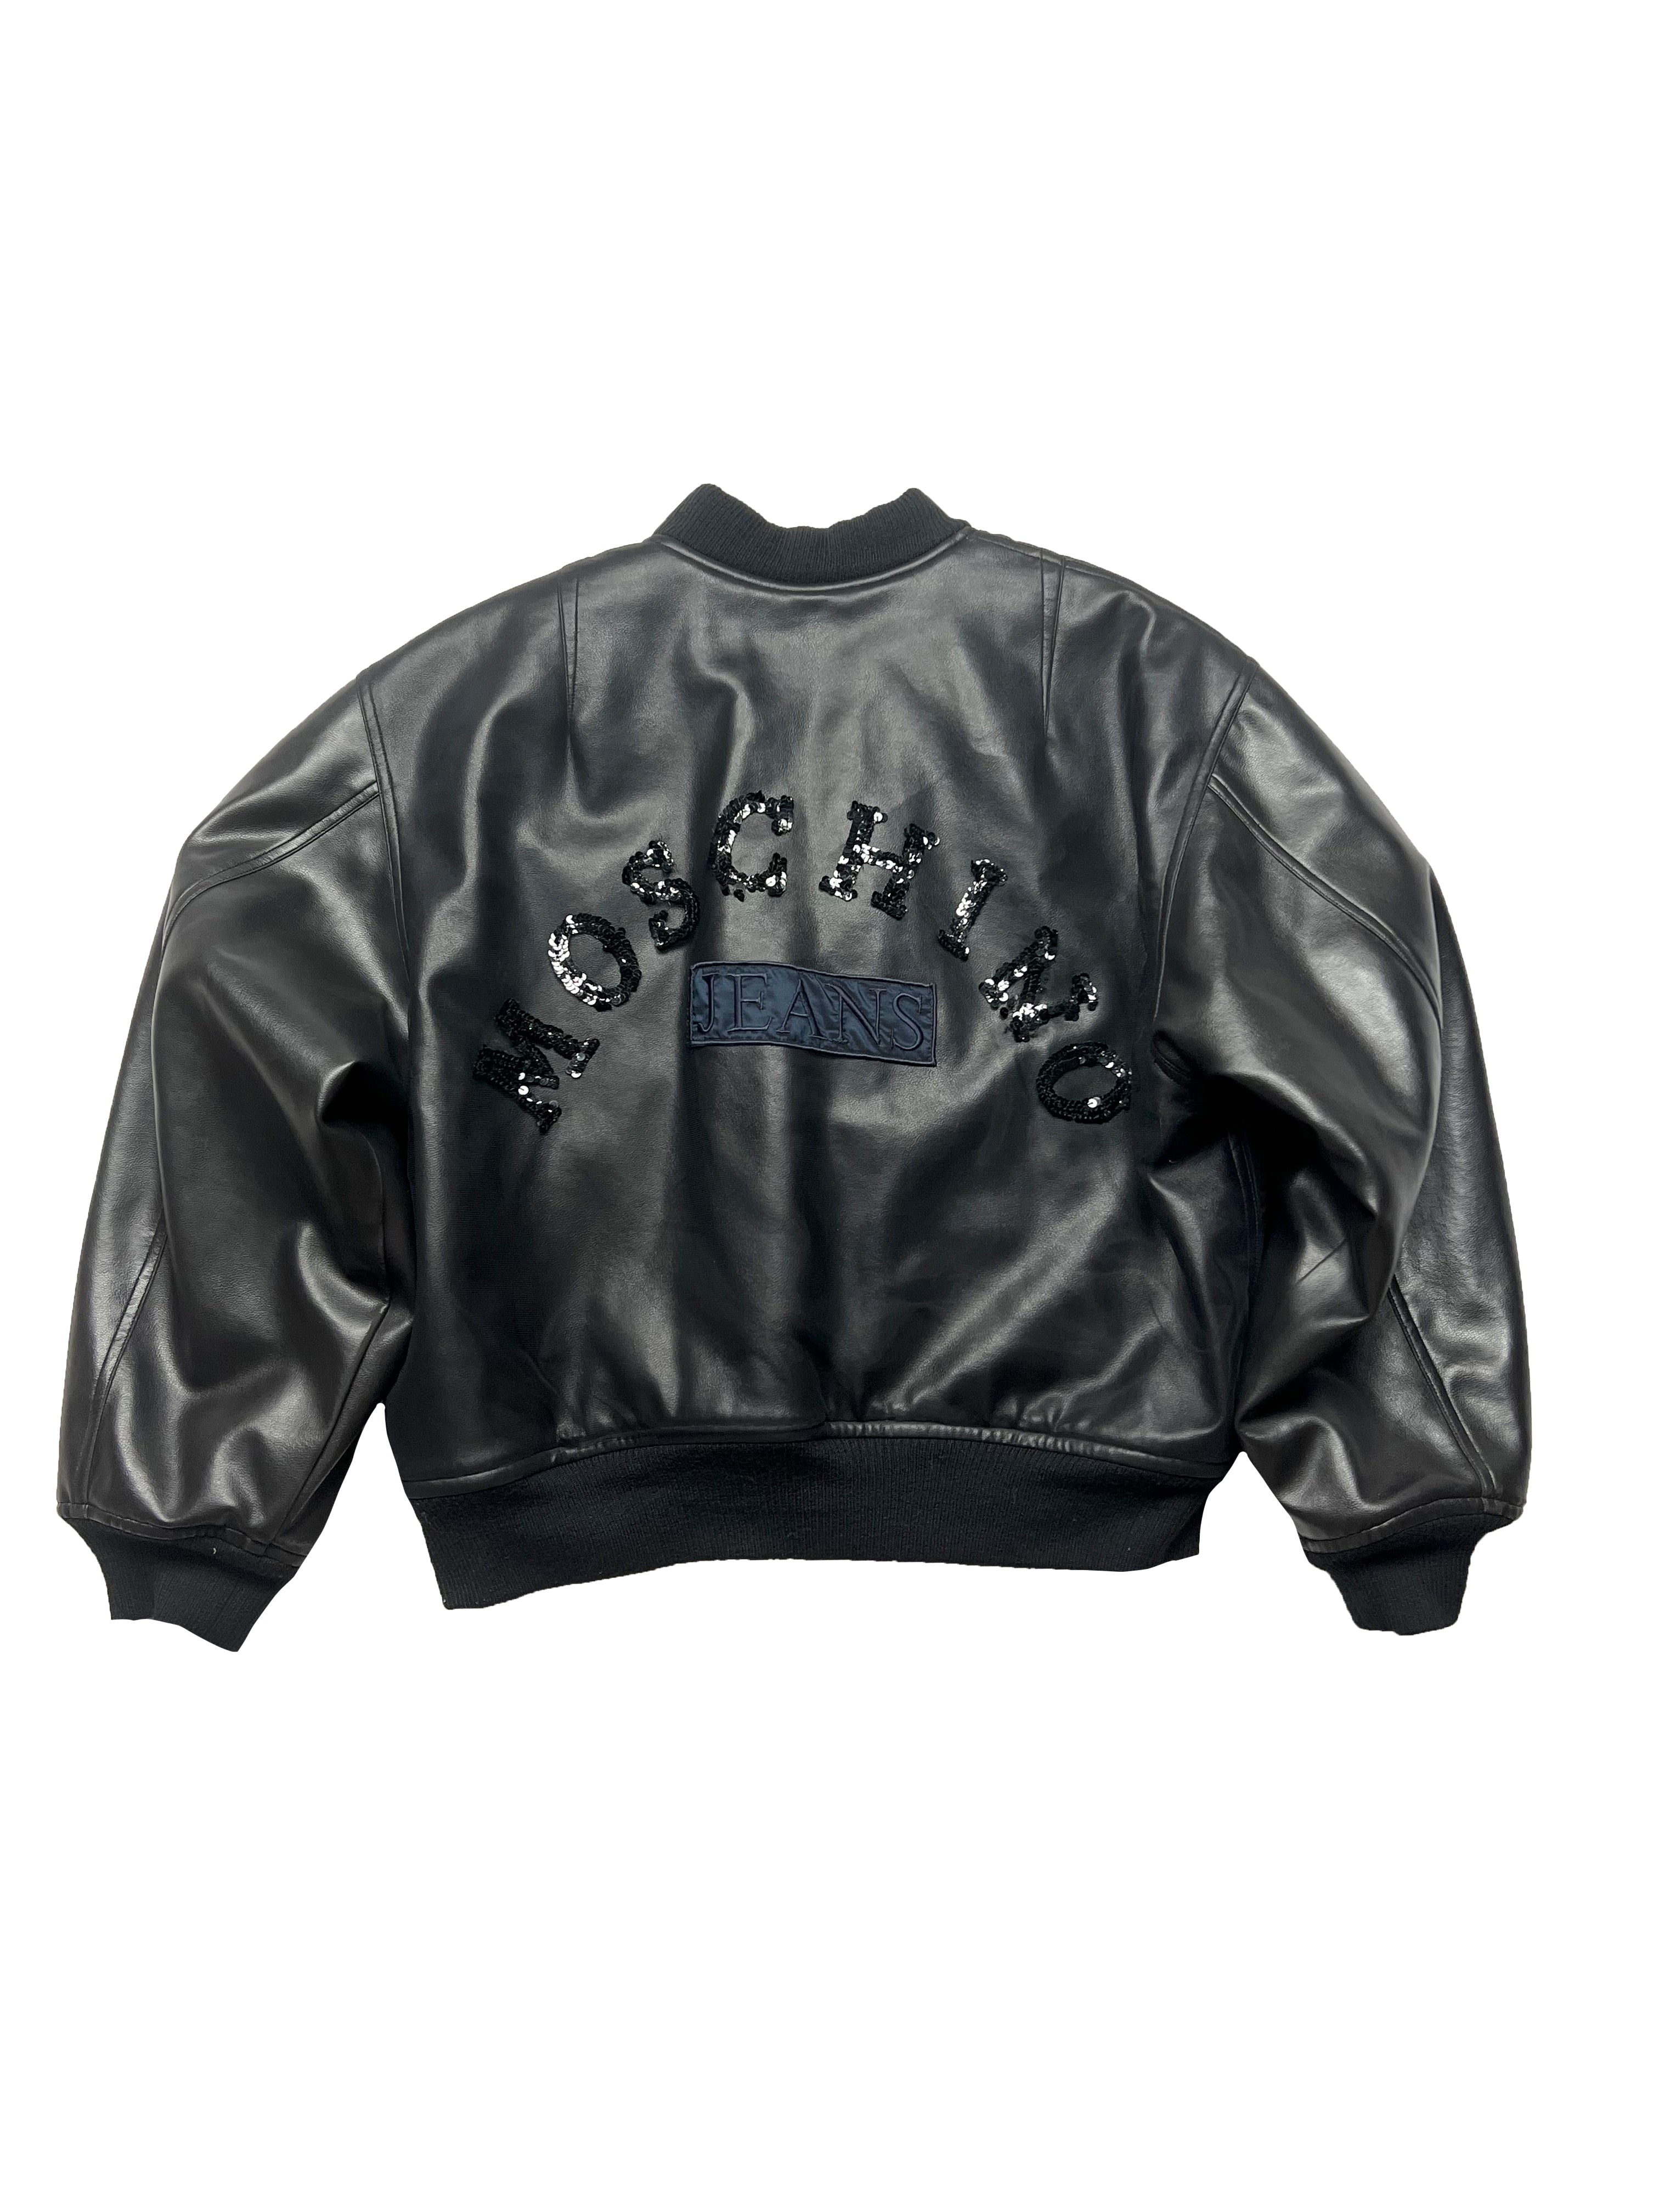 Moschino Jeans Spell Out Bomber Jacket 90's